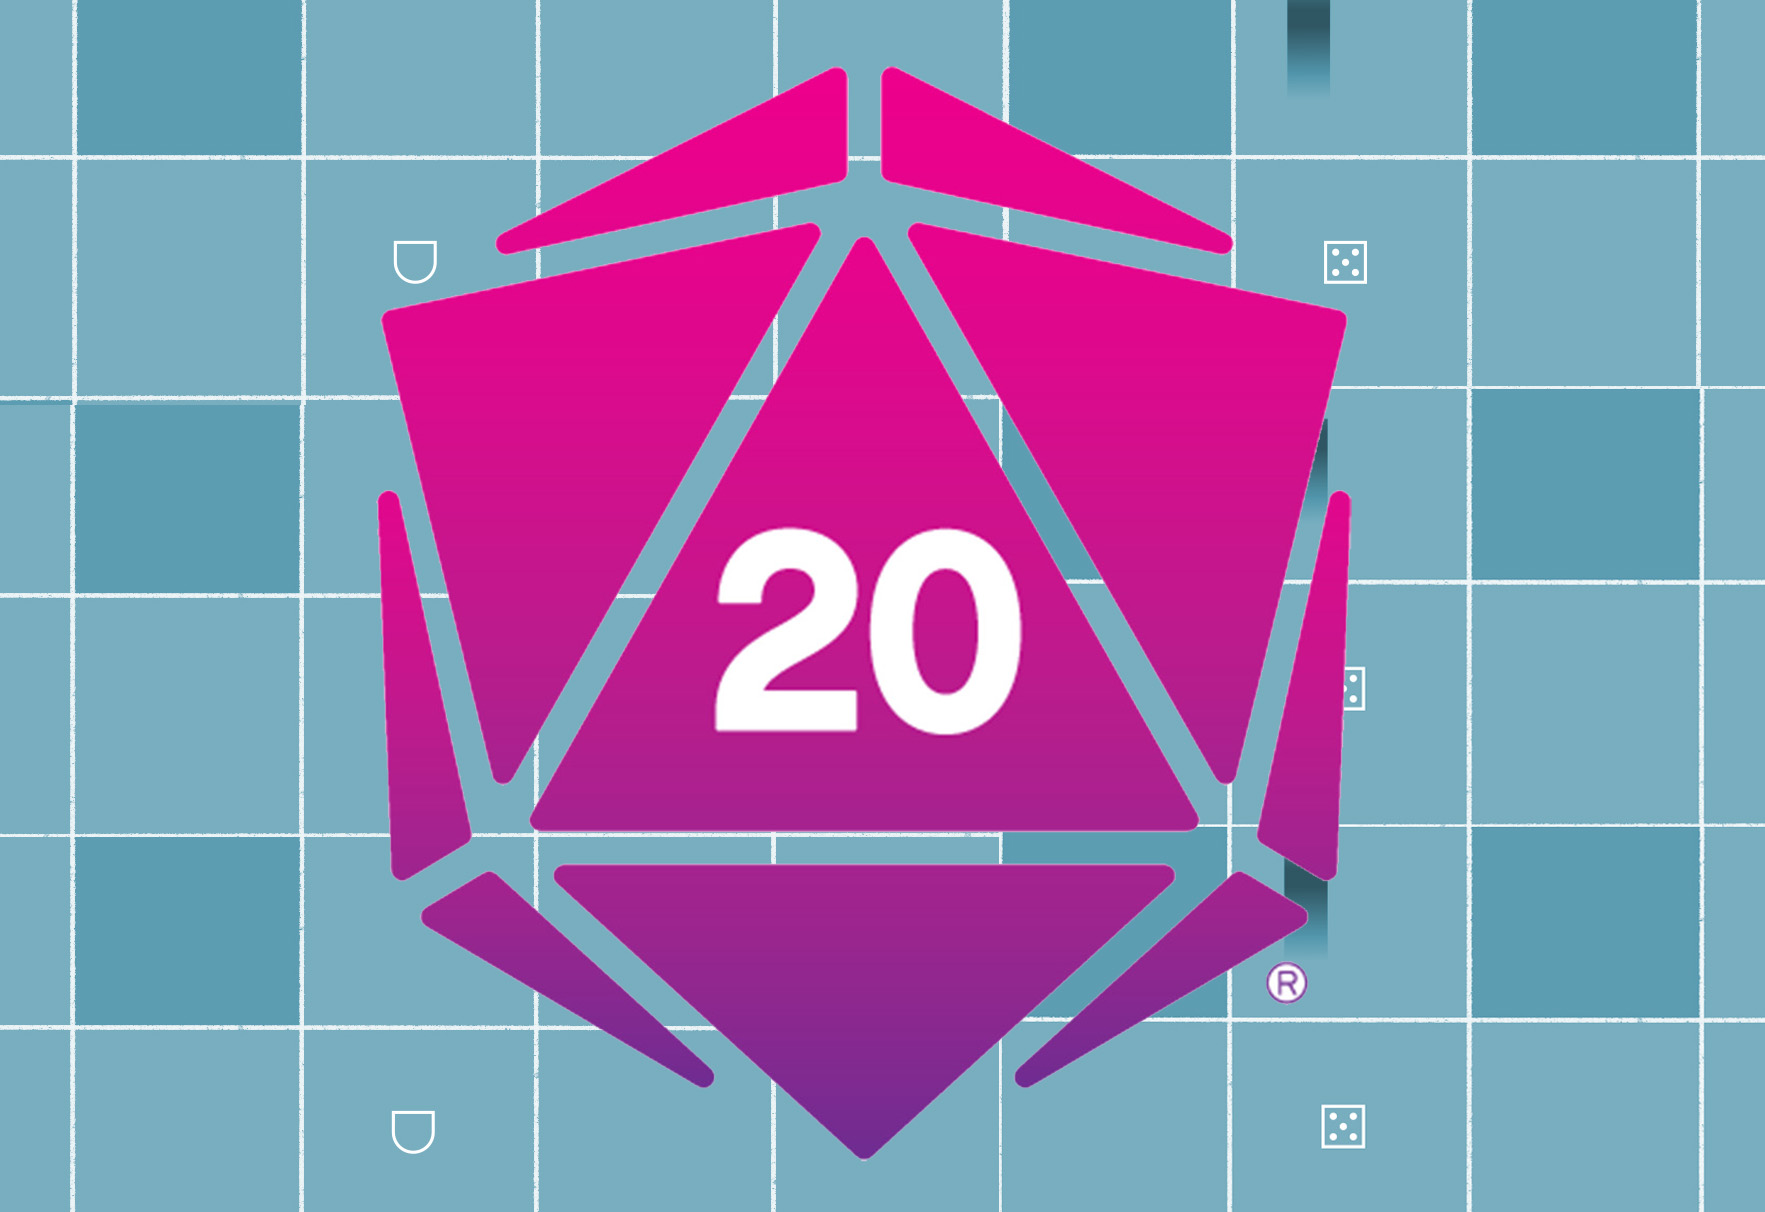 Roll20 coming directly to your Discord server